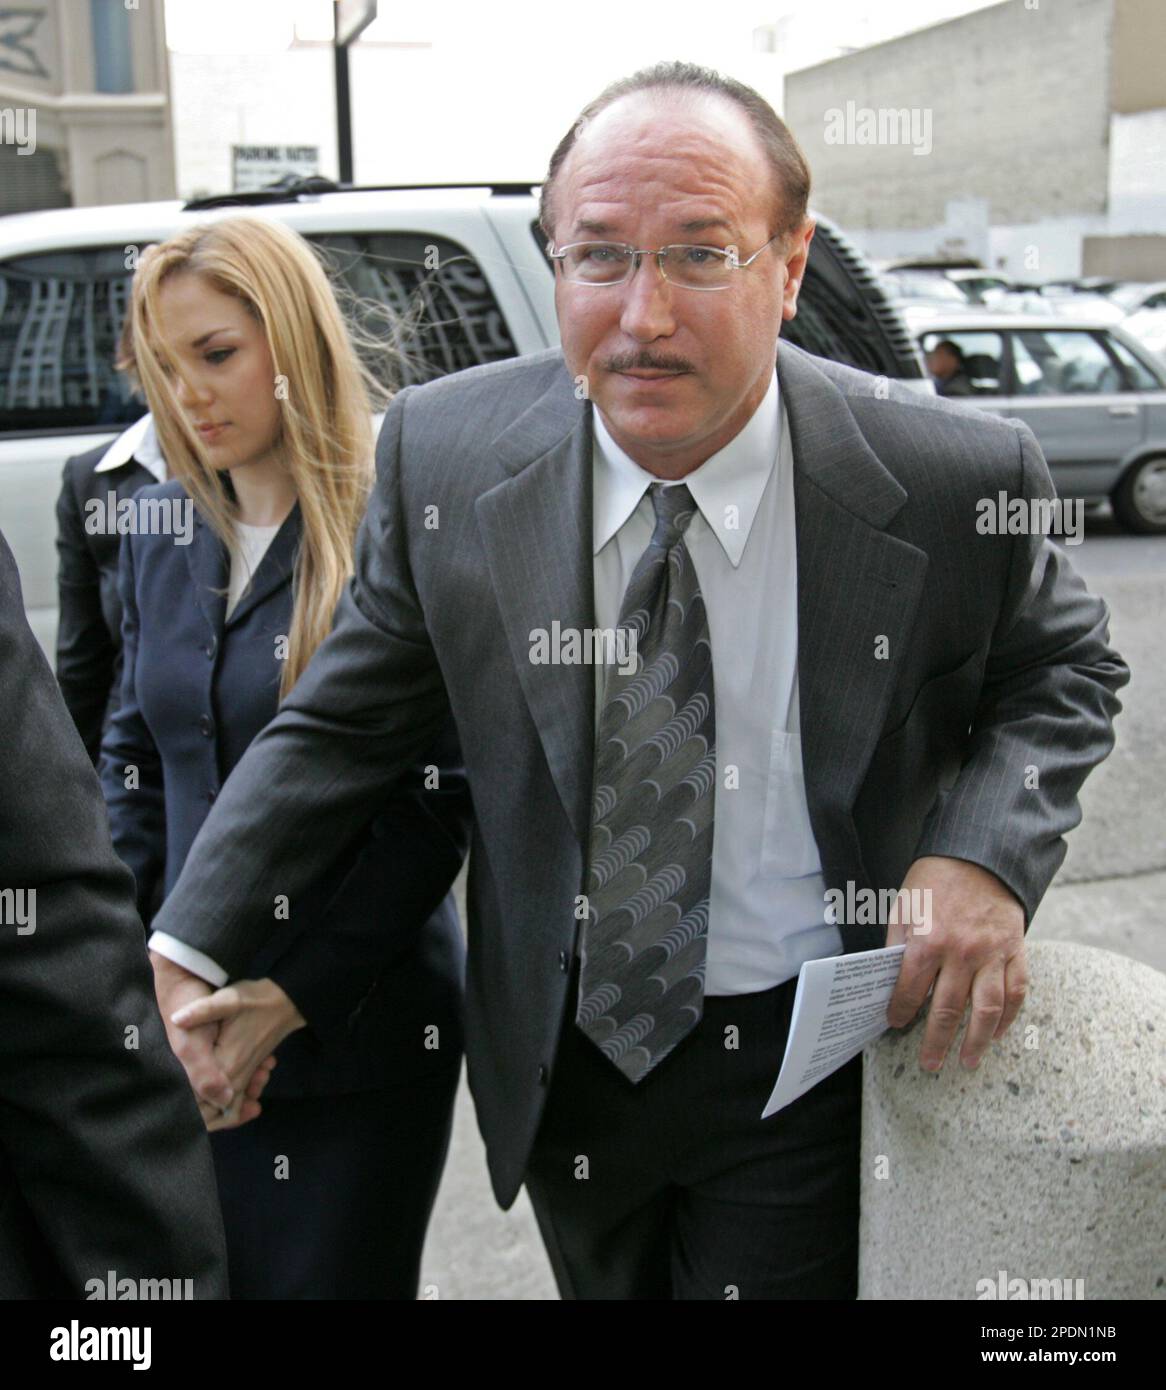 BALCO founder Victor Conte arrives with his daughter, Veronica Ekhardt ...